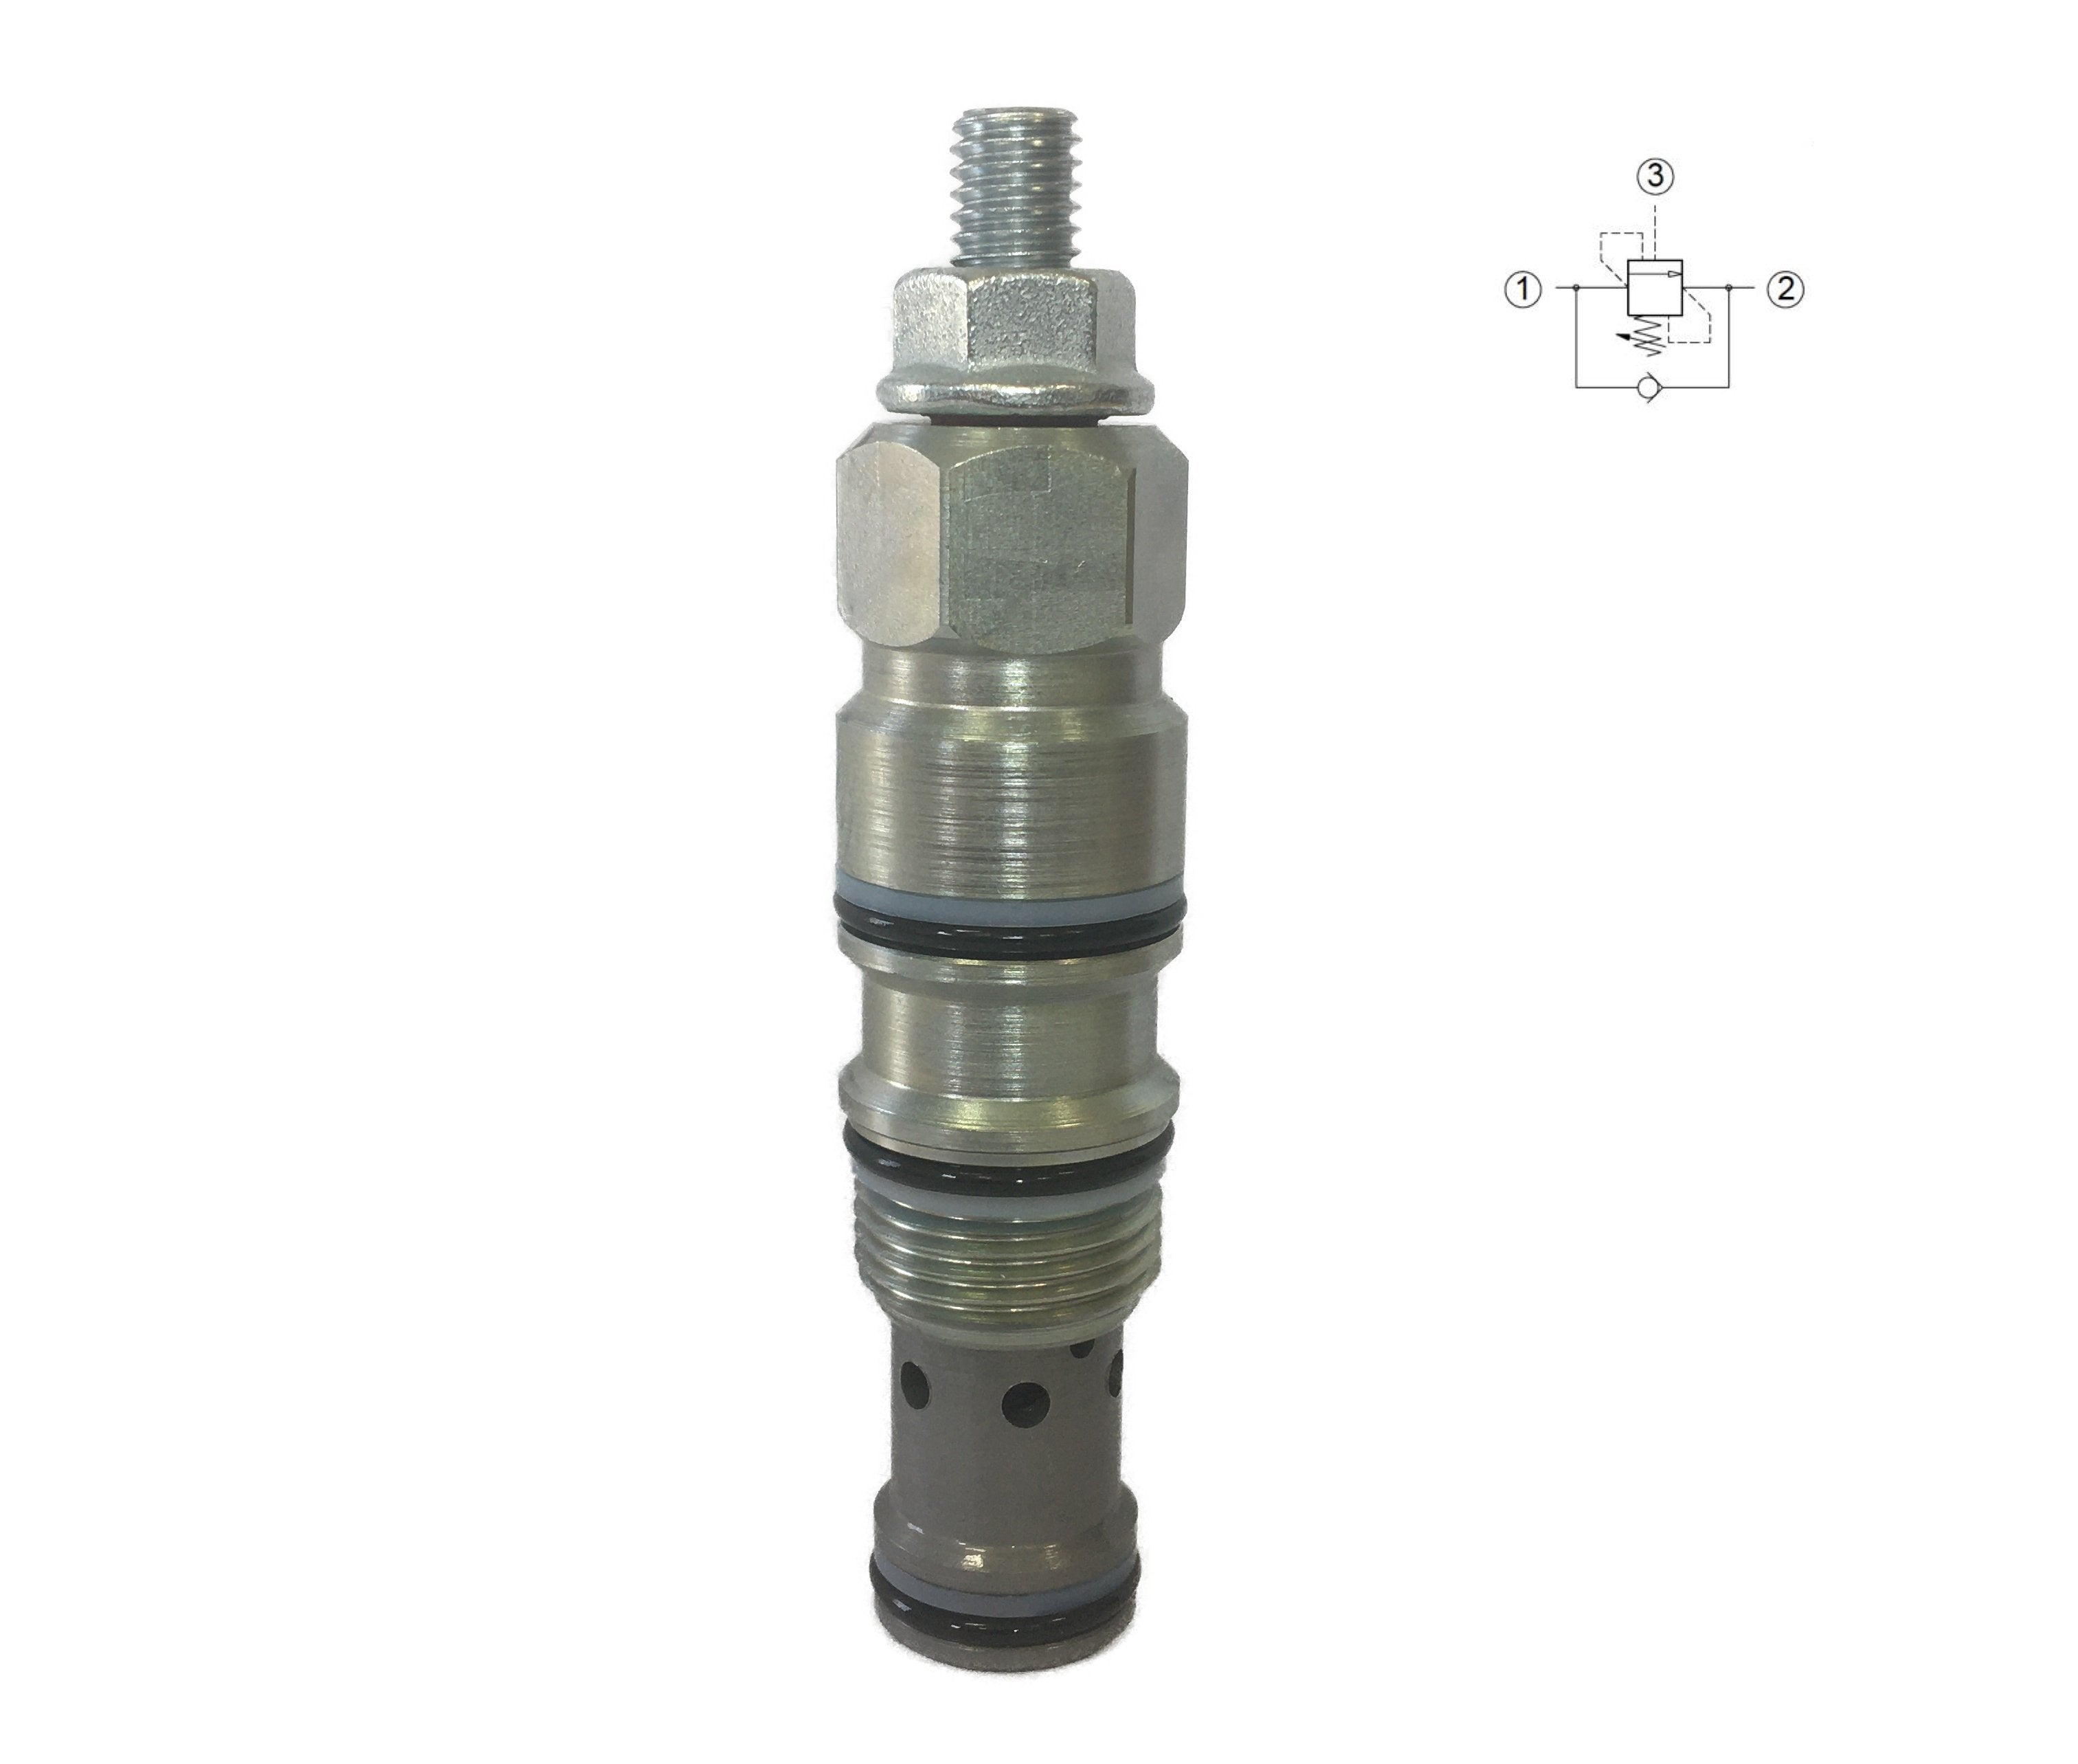 C000D210031100A : Valvole Counterbalance, 3:1, 16 GPM, 5000psi, 2030 to 5075psi adjustable, 3045psi Preset, T-11A